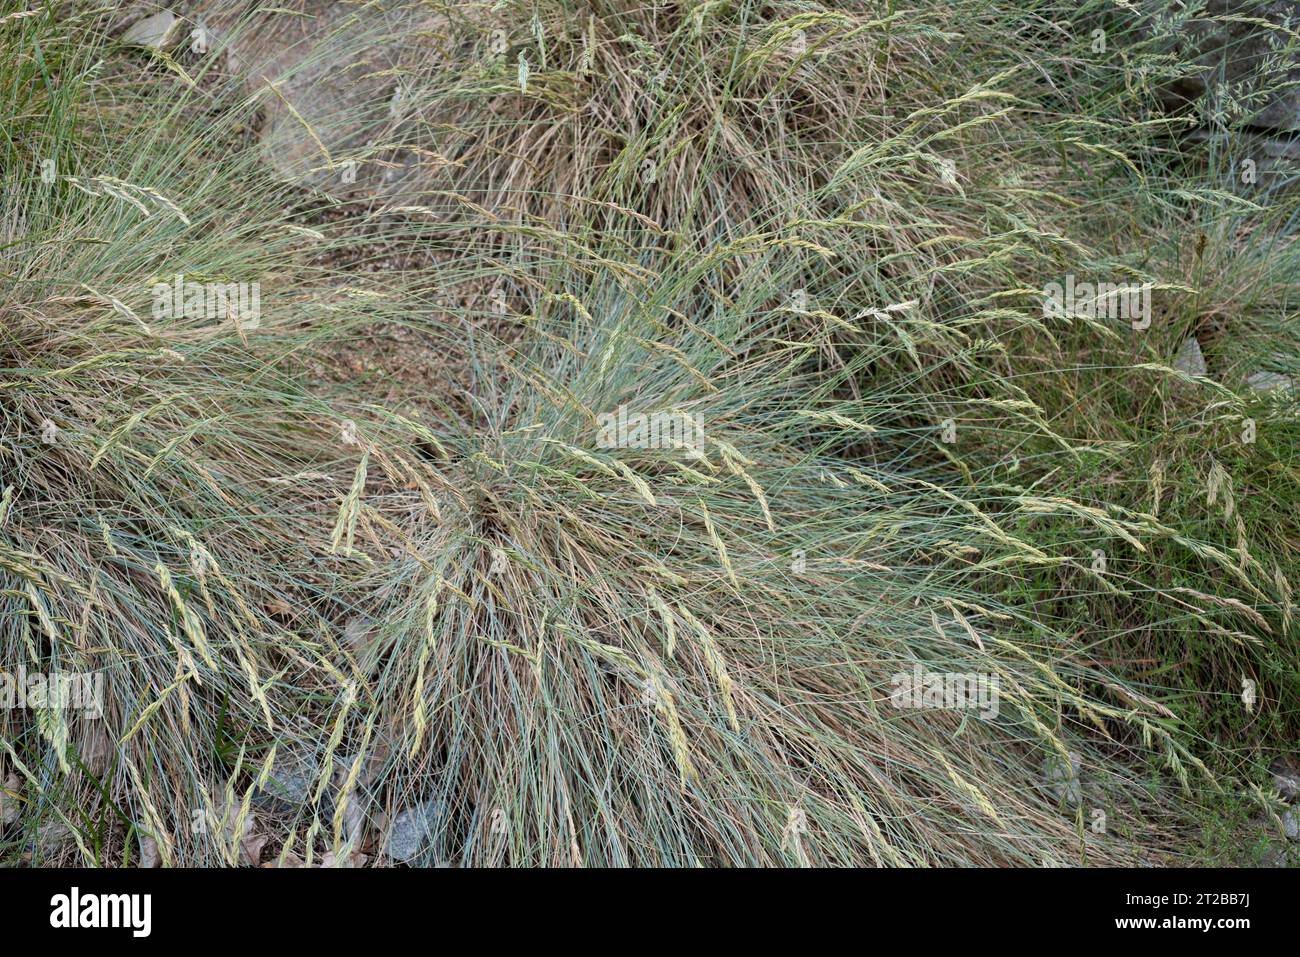 Blue fescue (Festuca glauca) is a perennial herb native to Europe. Flowering plant. Stock Photo